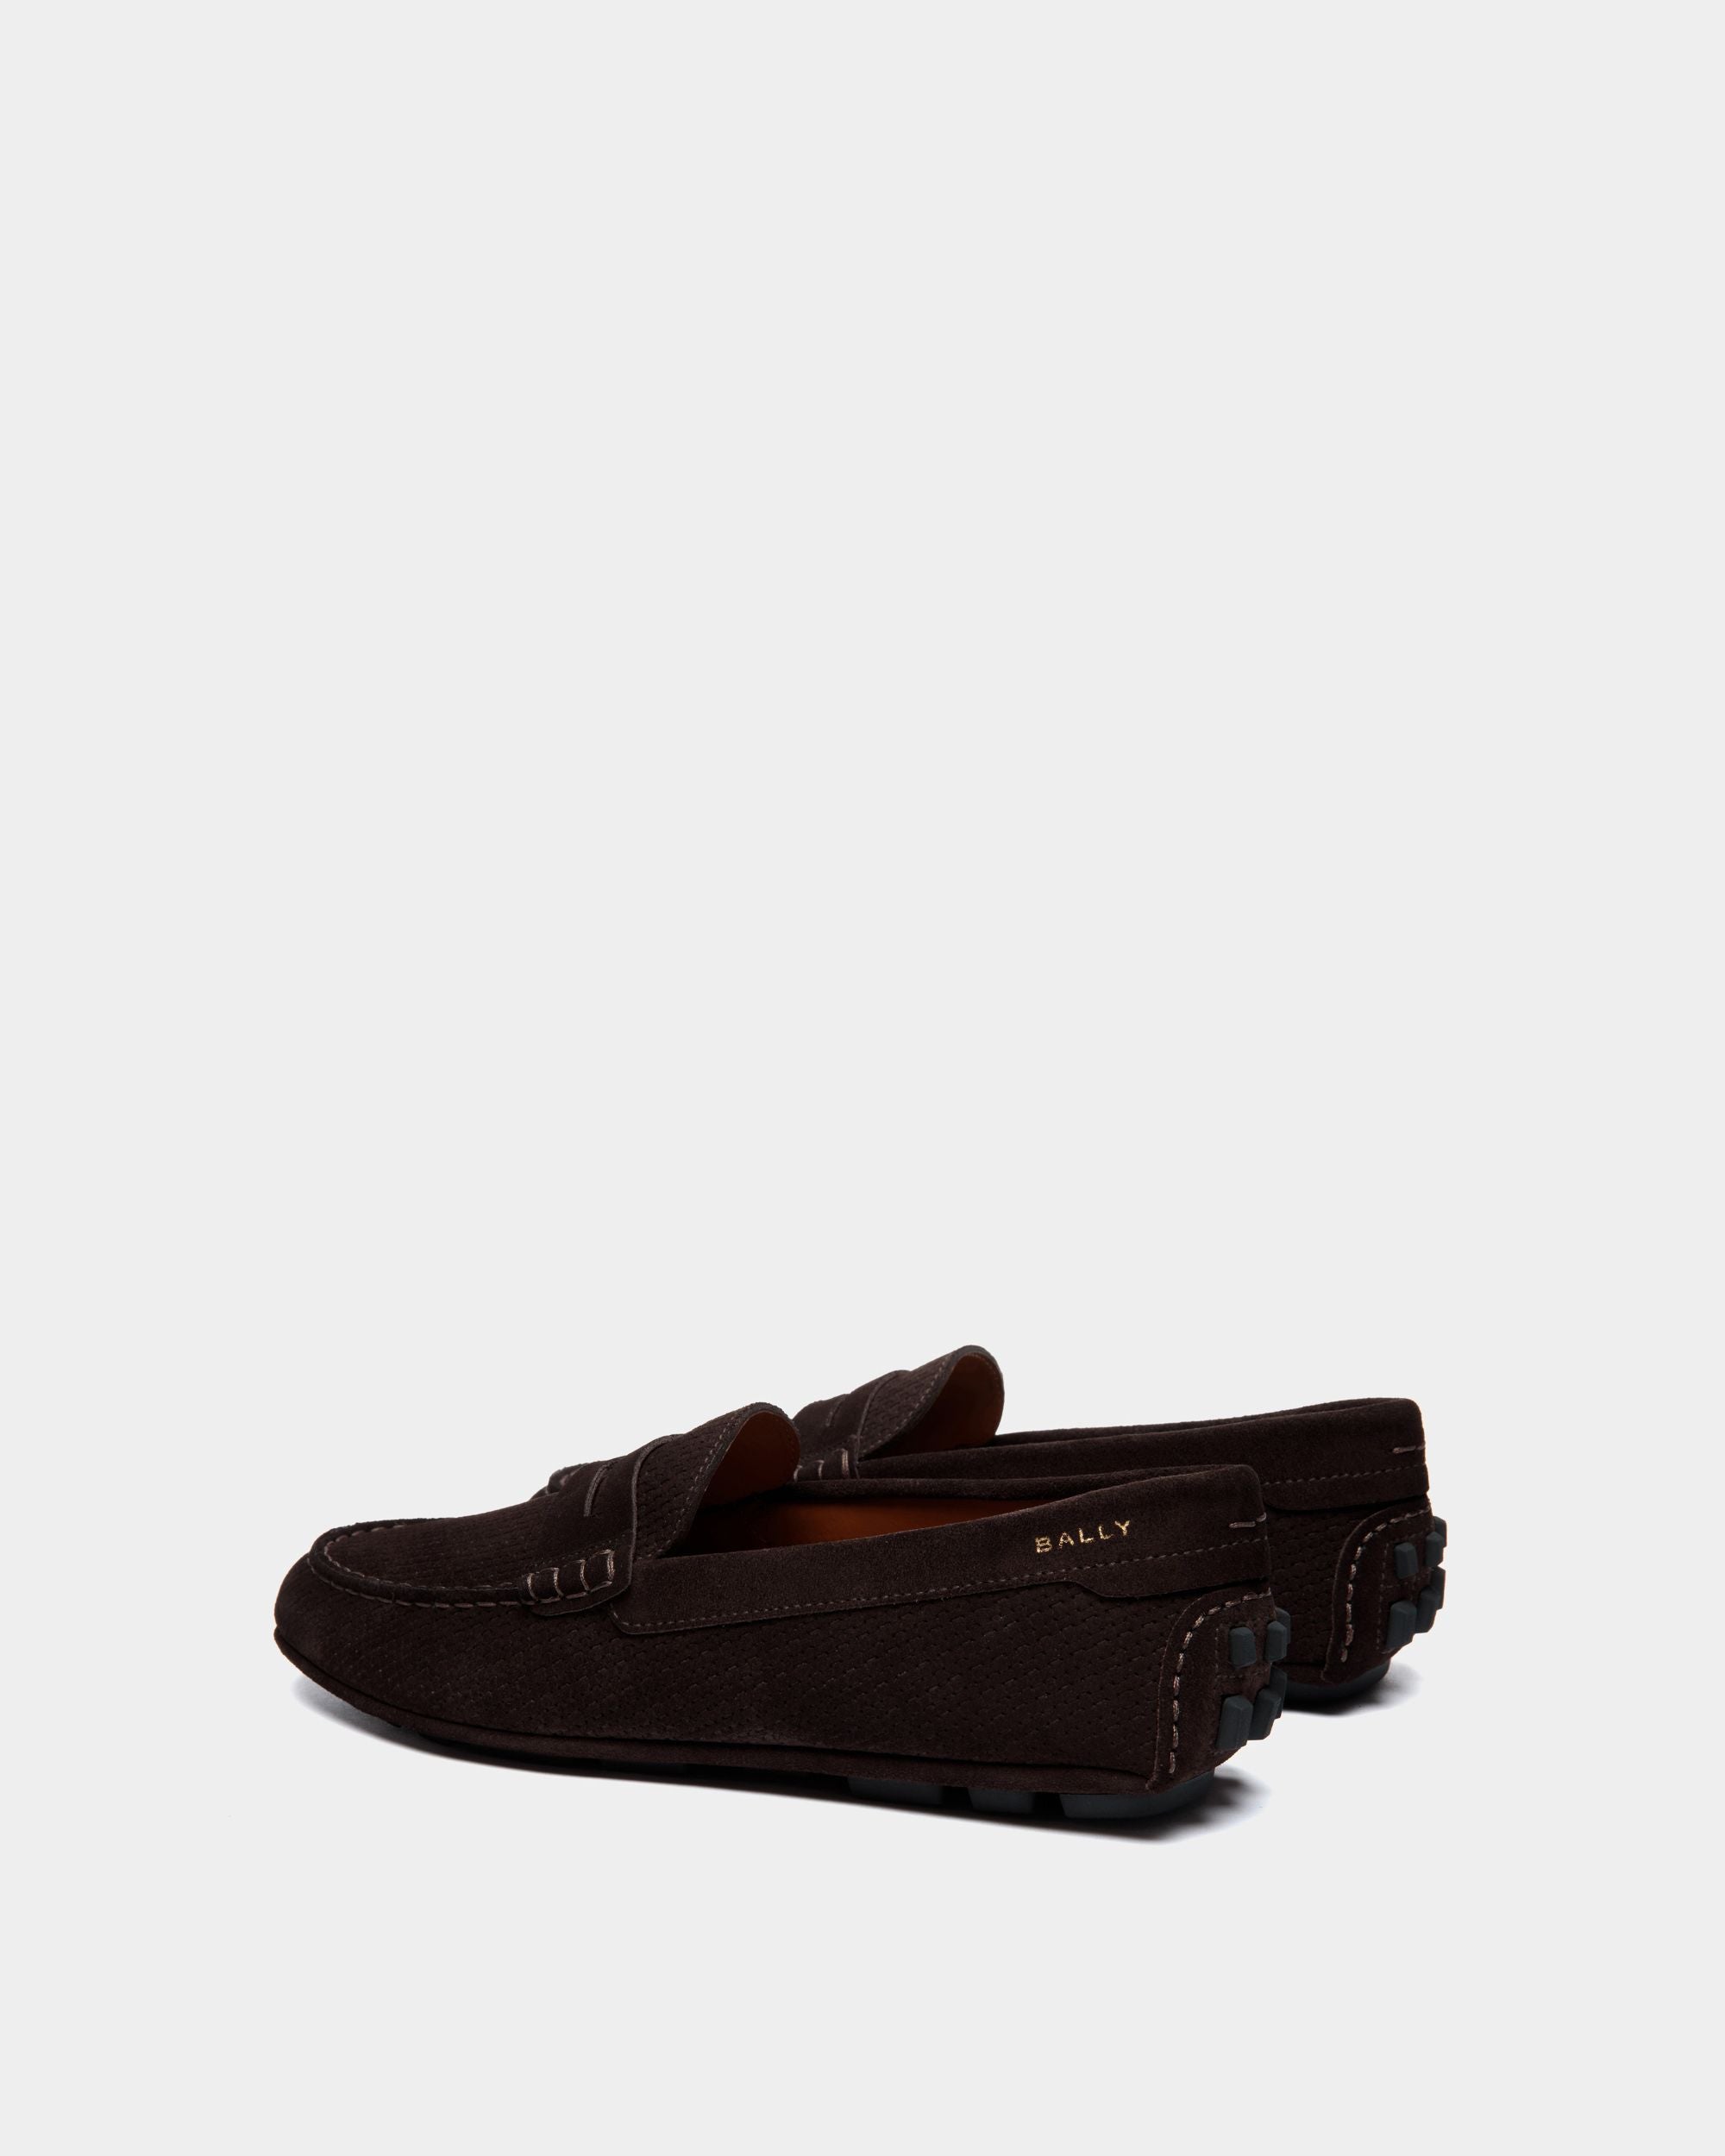 Kerbs | Men's Driver in Brown Embossed Suede| Bally | Still Life 3/4 Back